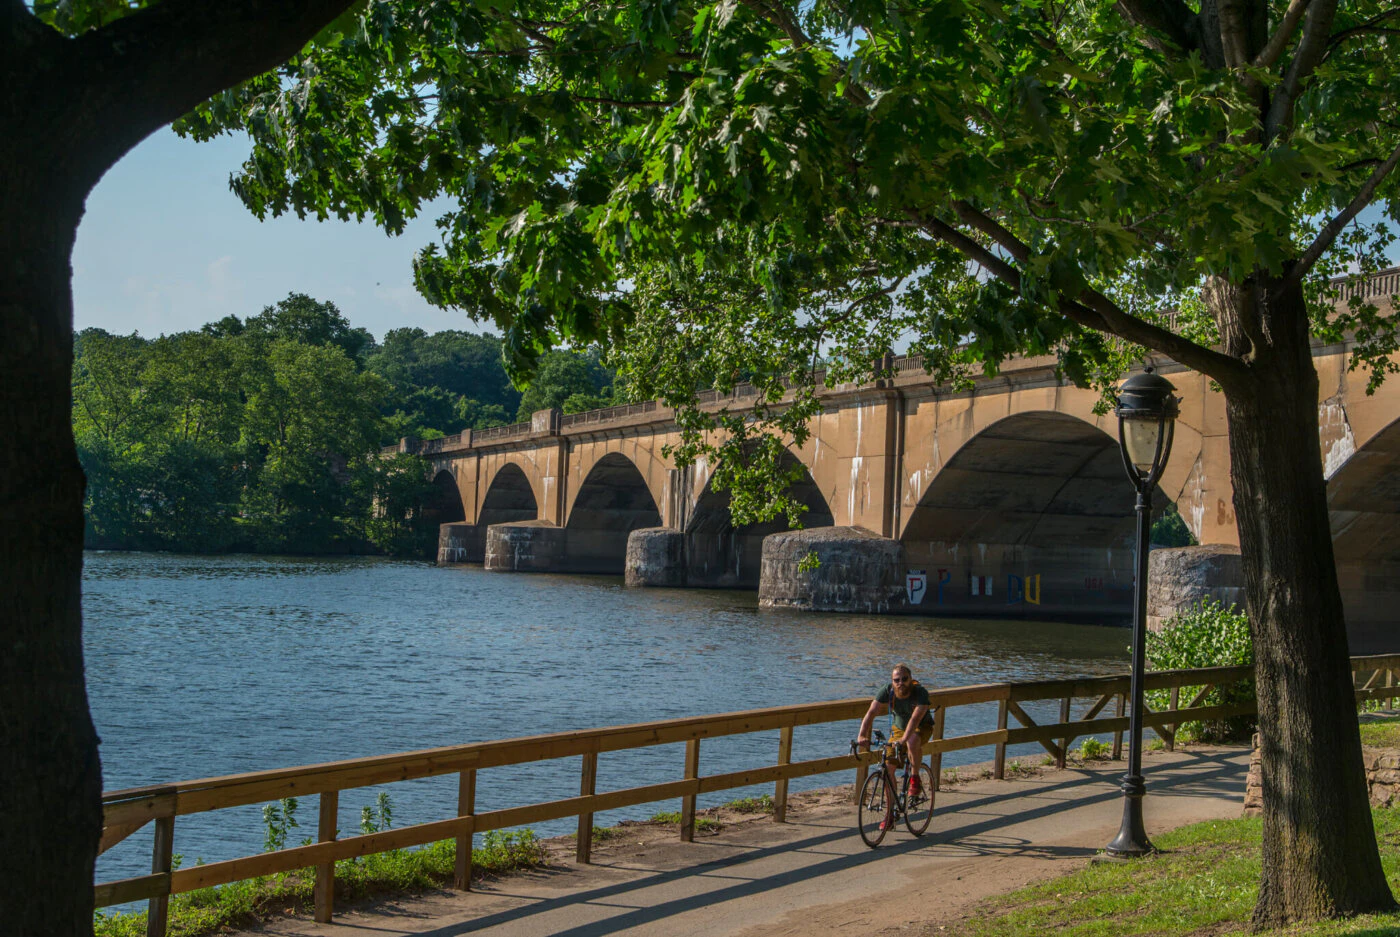 The four-mile long Kelly Drive, home to the historic Boathouse Row and annual Dad Vail Regatta, attracts bikers, runners, joggers and walkers to its trail and park, which runs along the Schuylkill River. Visitors without a bike can stop at Wheel Fun Rentals, located at the start of Boathouse Row, for specialty bike and surrey rentals. (Photo: photo by R. Kennedy for VISIT PHILADELPHIA®)